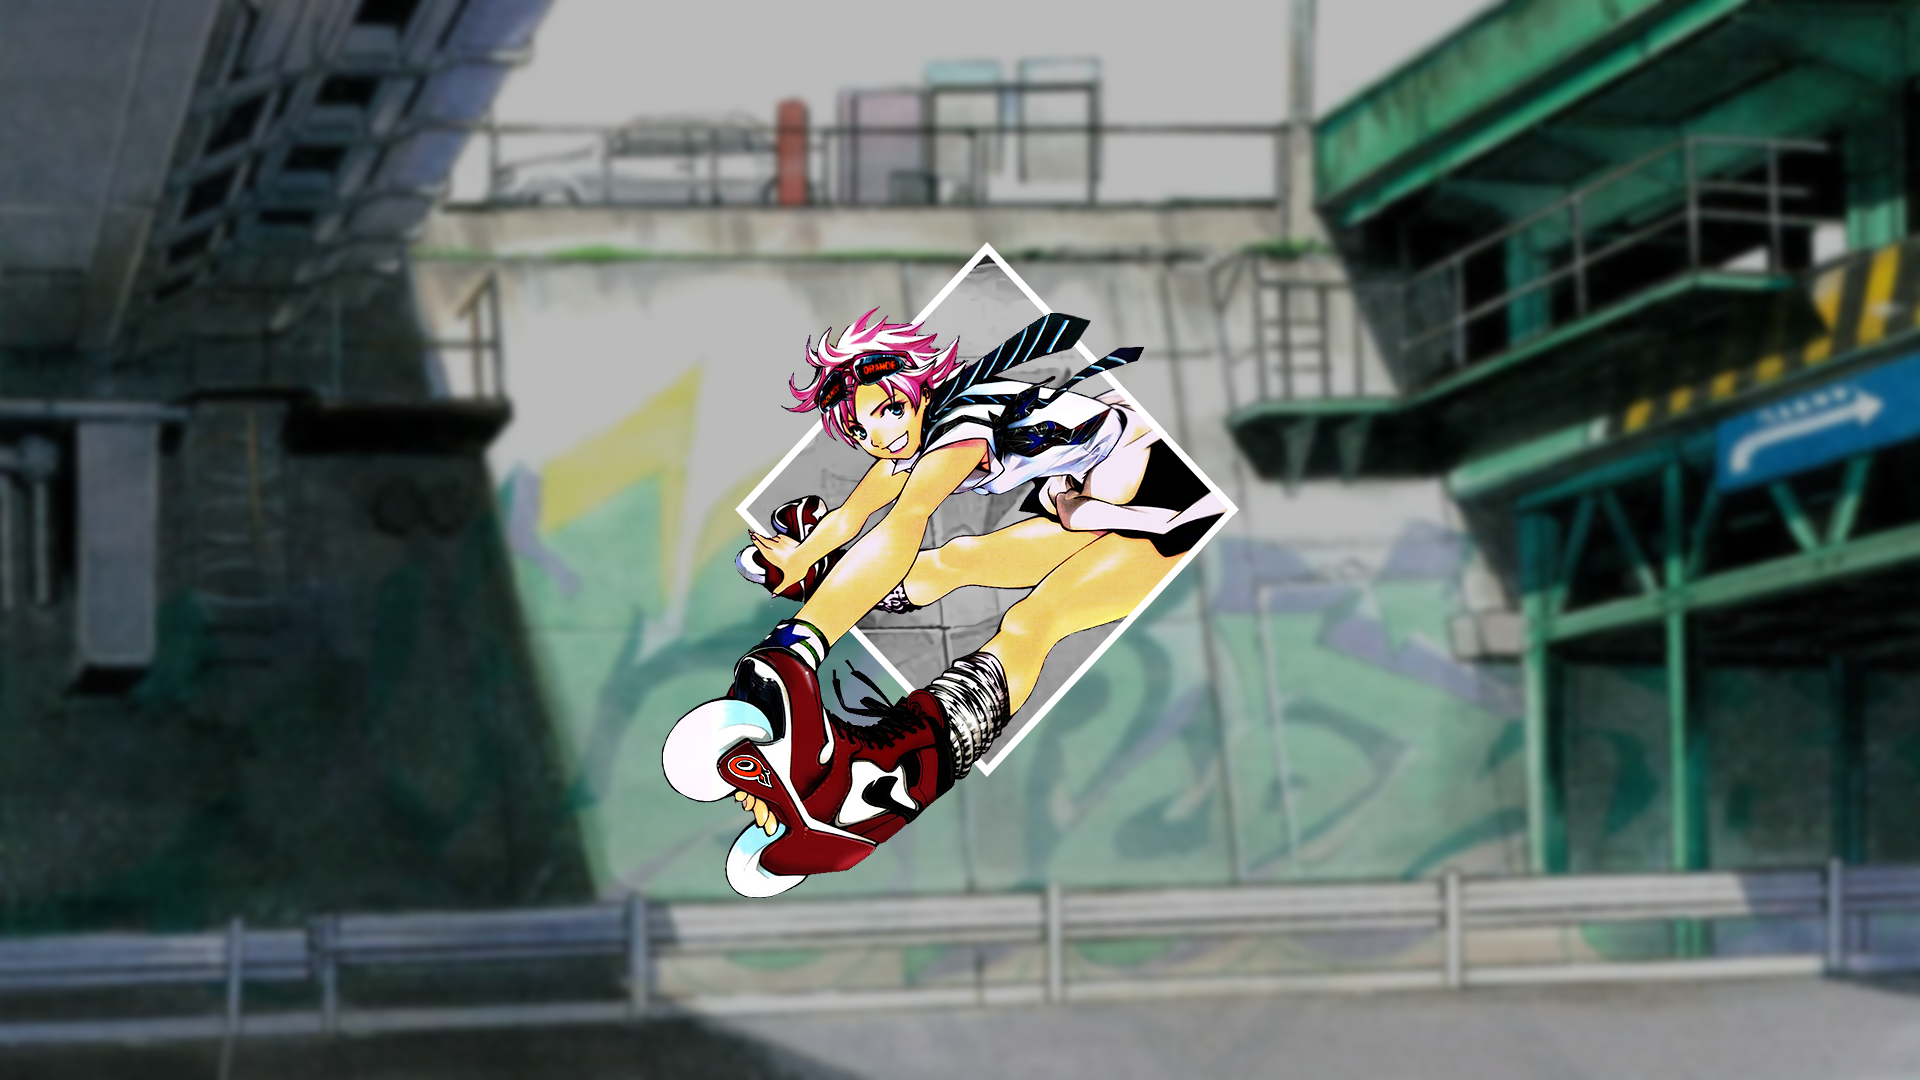 Anime 1920x1080 Air Gear picture-in-picture anime girls